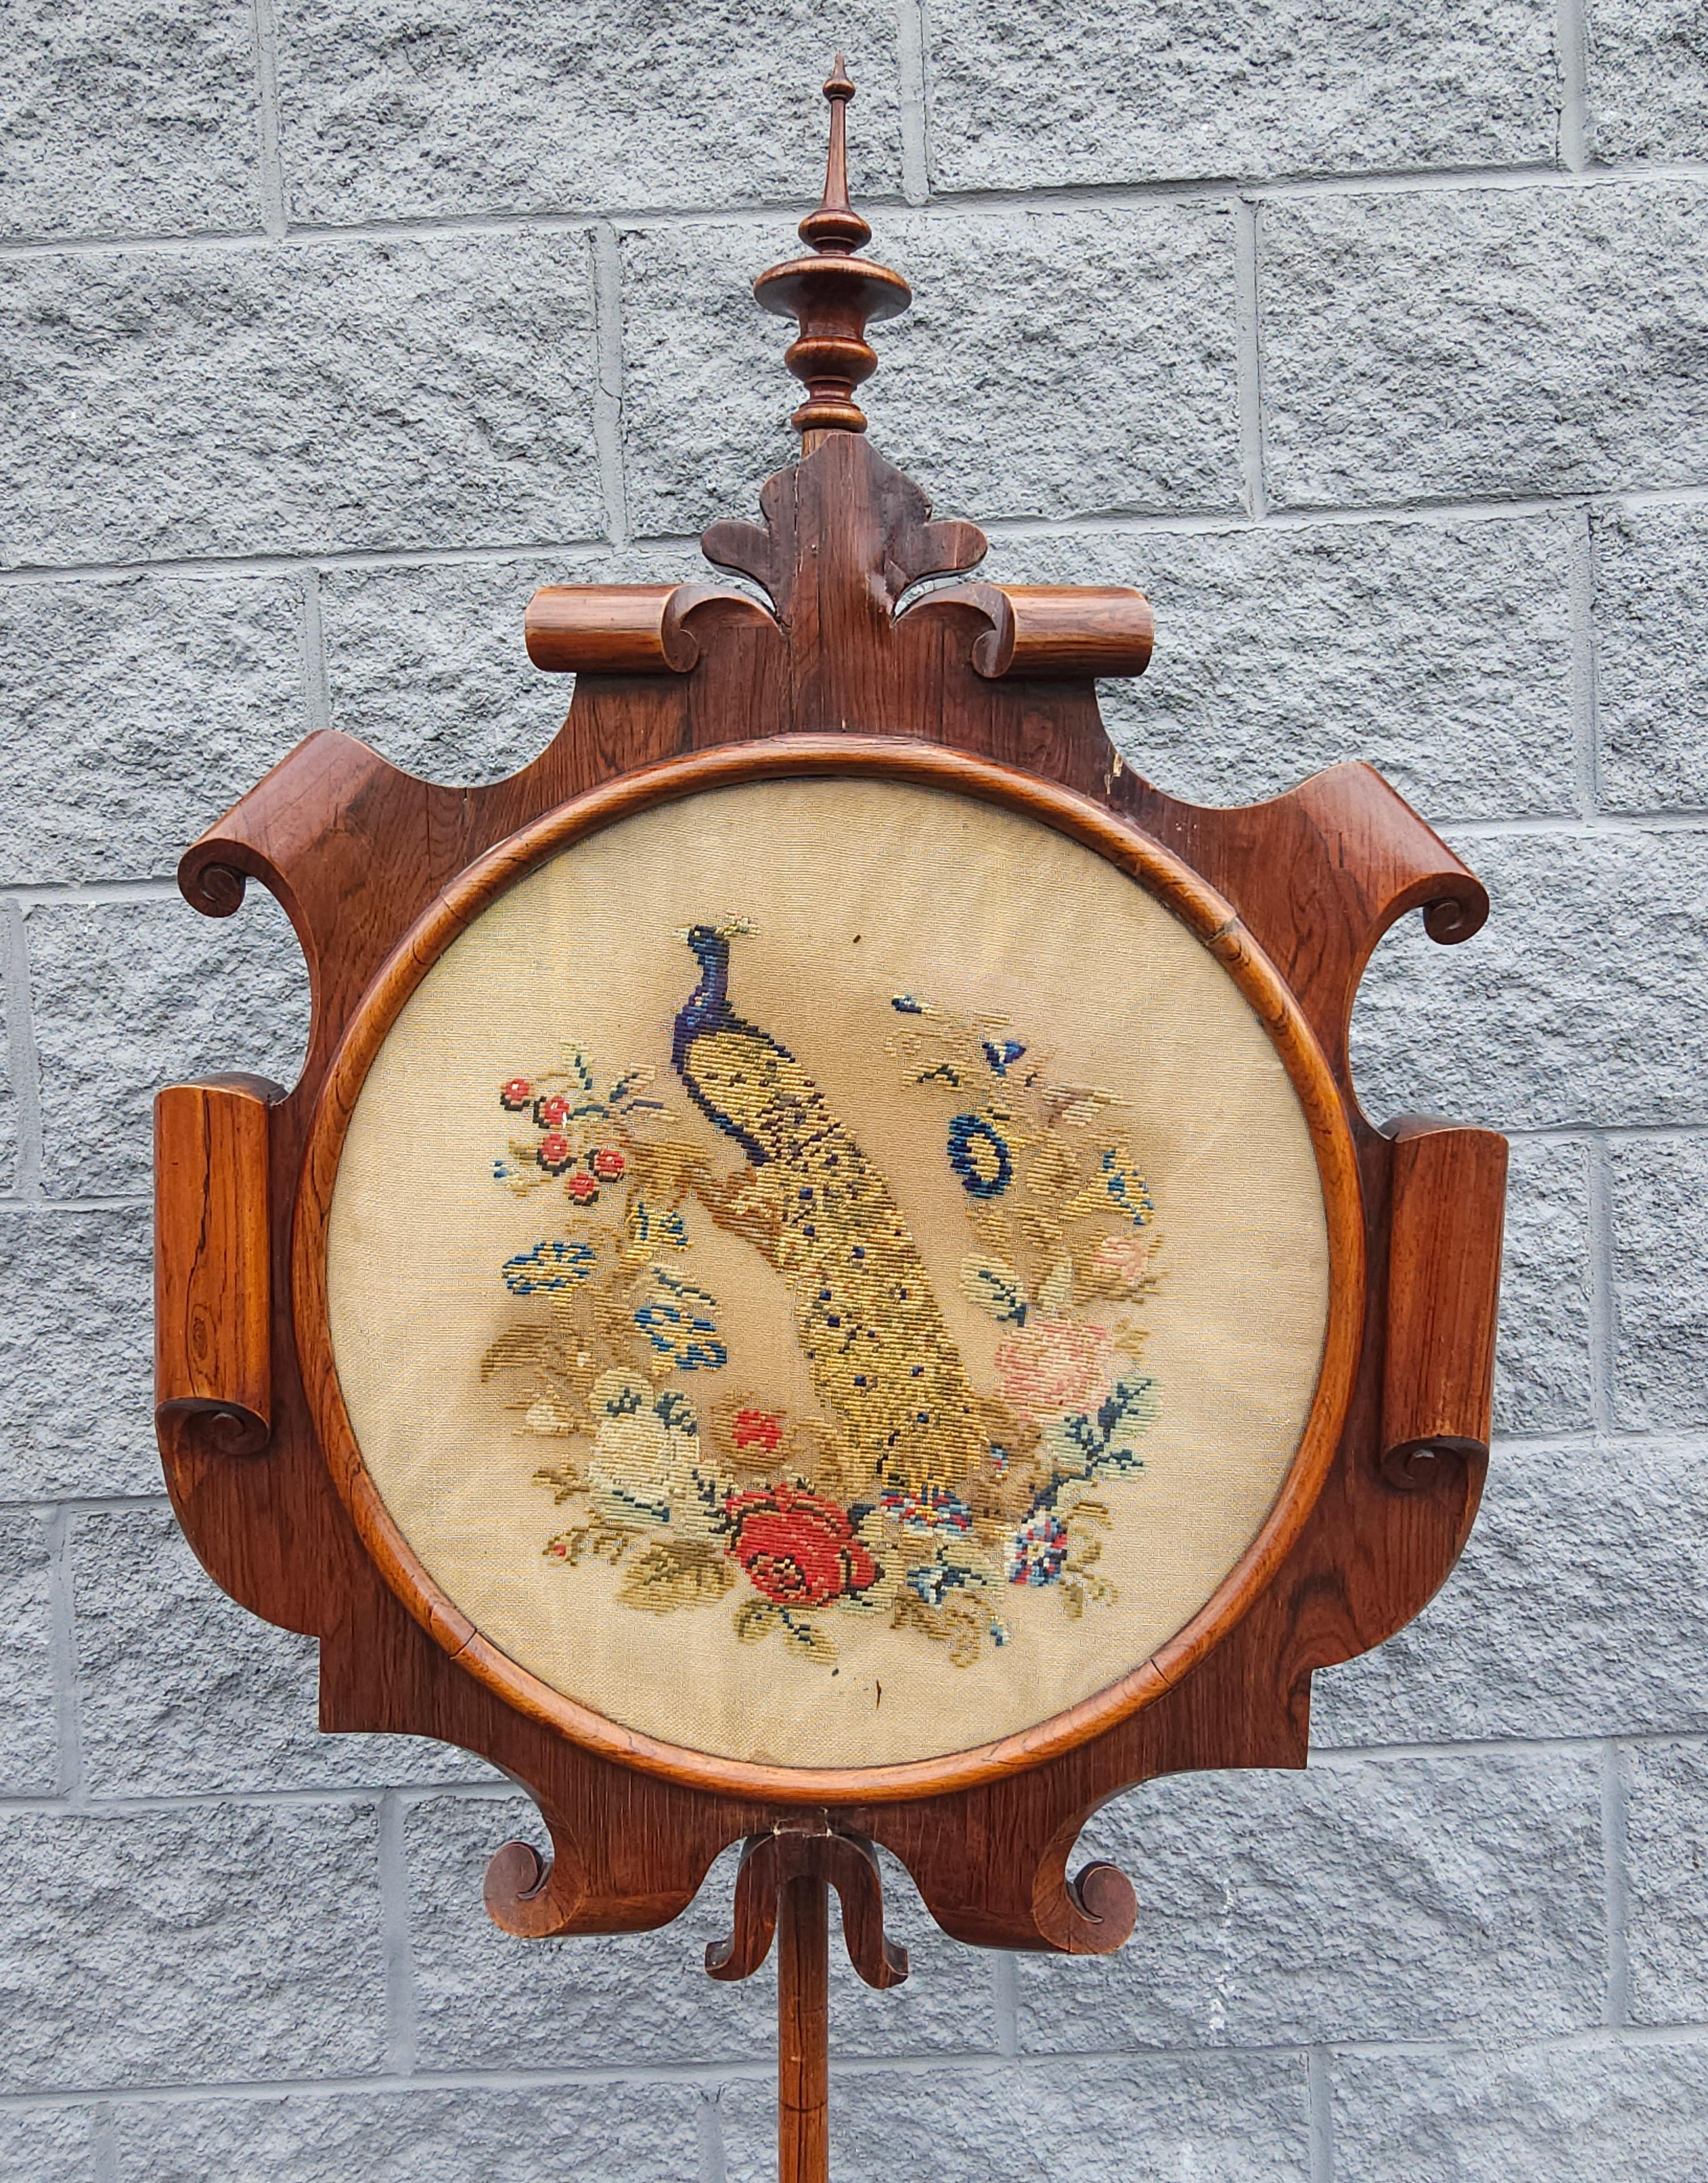 A 19th Century Victorian Renaissance style Rosewood with Floral And Peacock Needlepoint Pole Screen with exceptional craftsmanship. Adjustable height screen. Screen protected by an acrylic cover. Measures 24